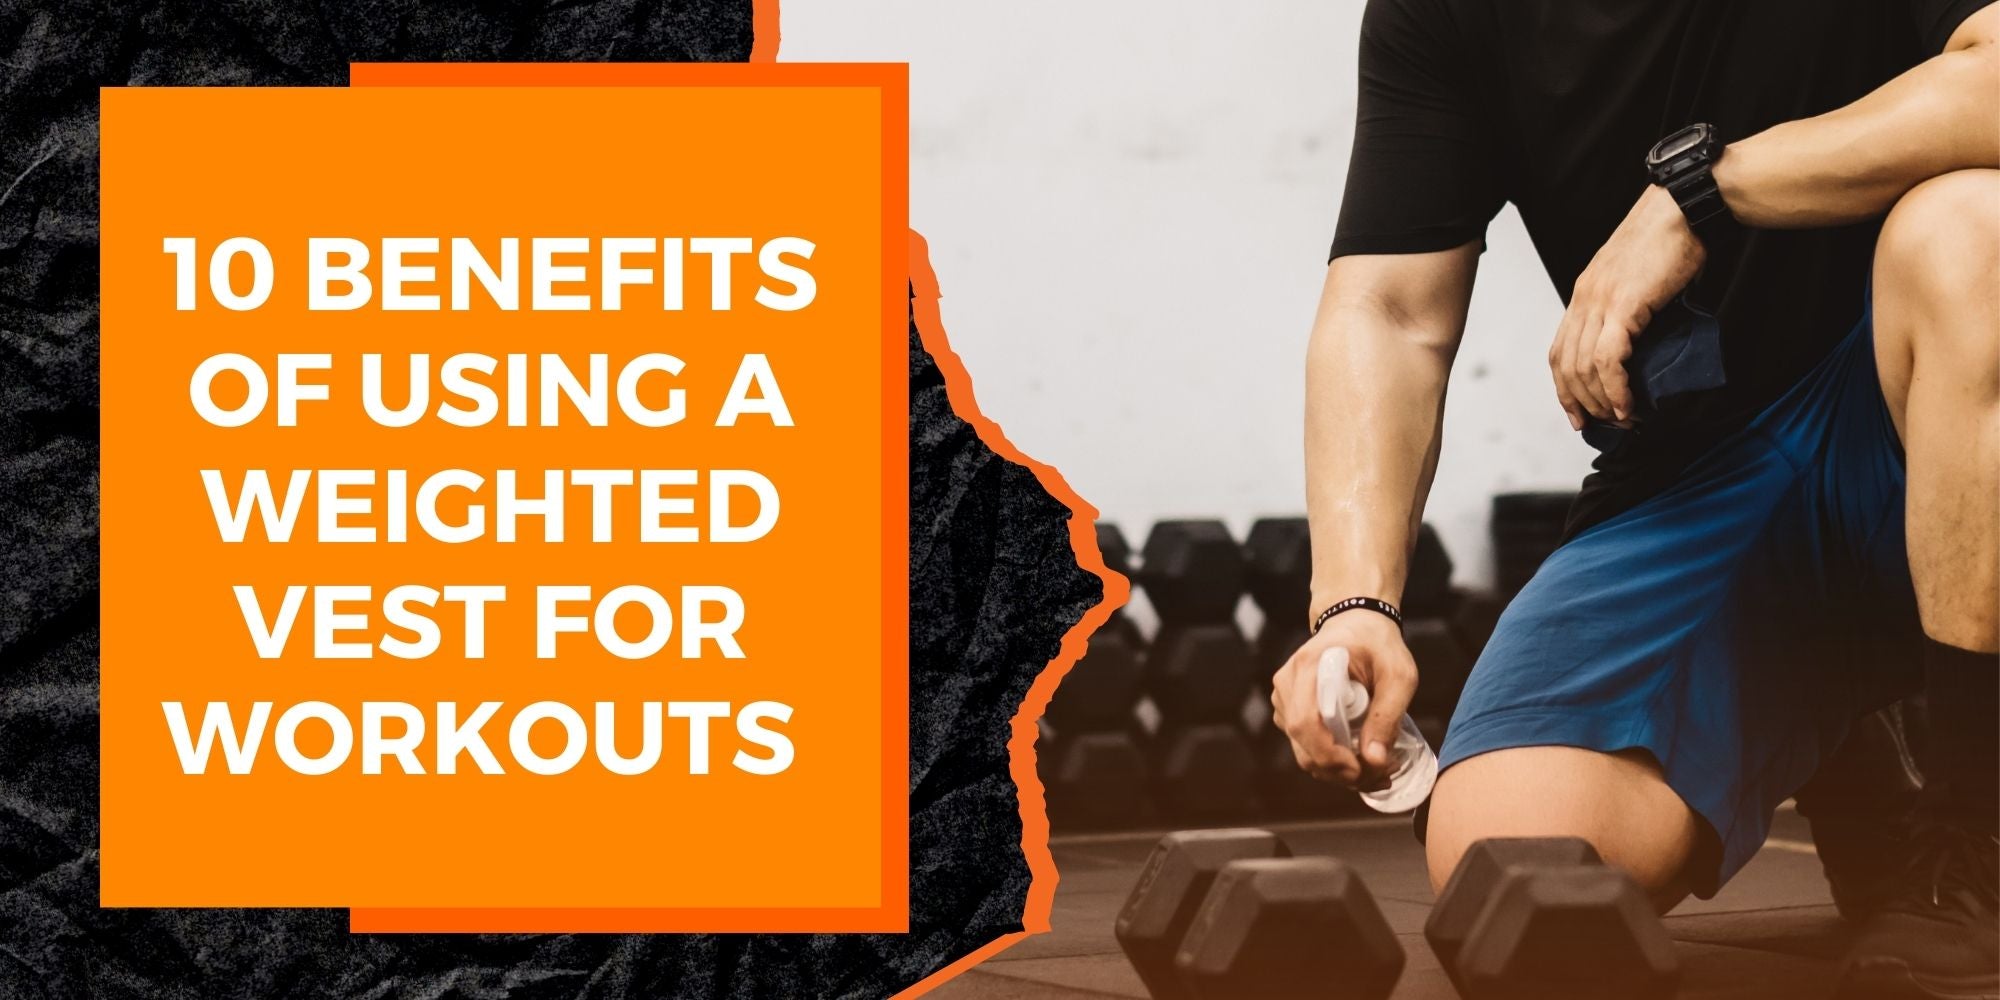 10 Benefits of Using a Weighted Vest for Workouts